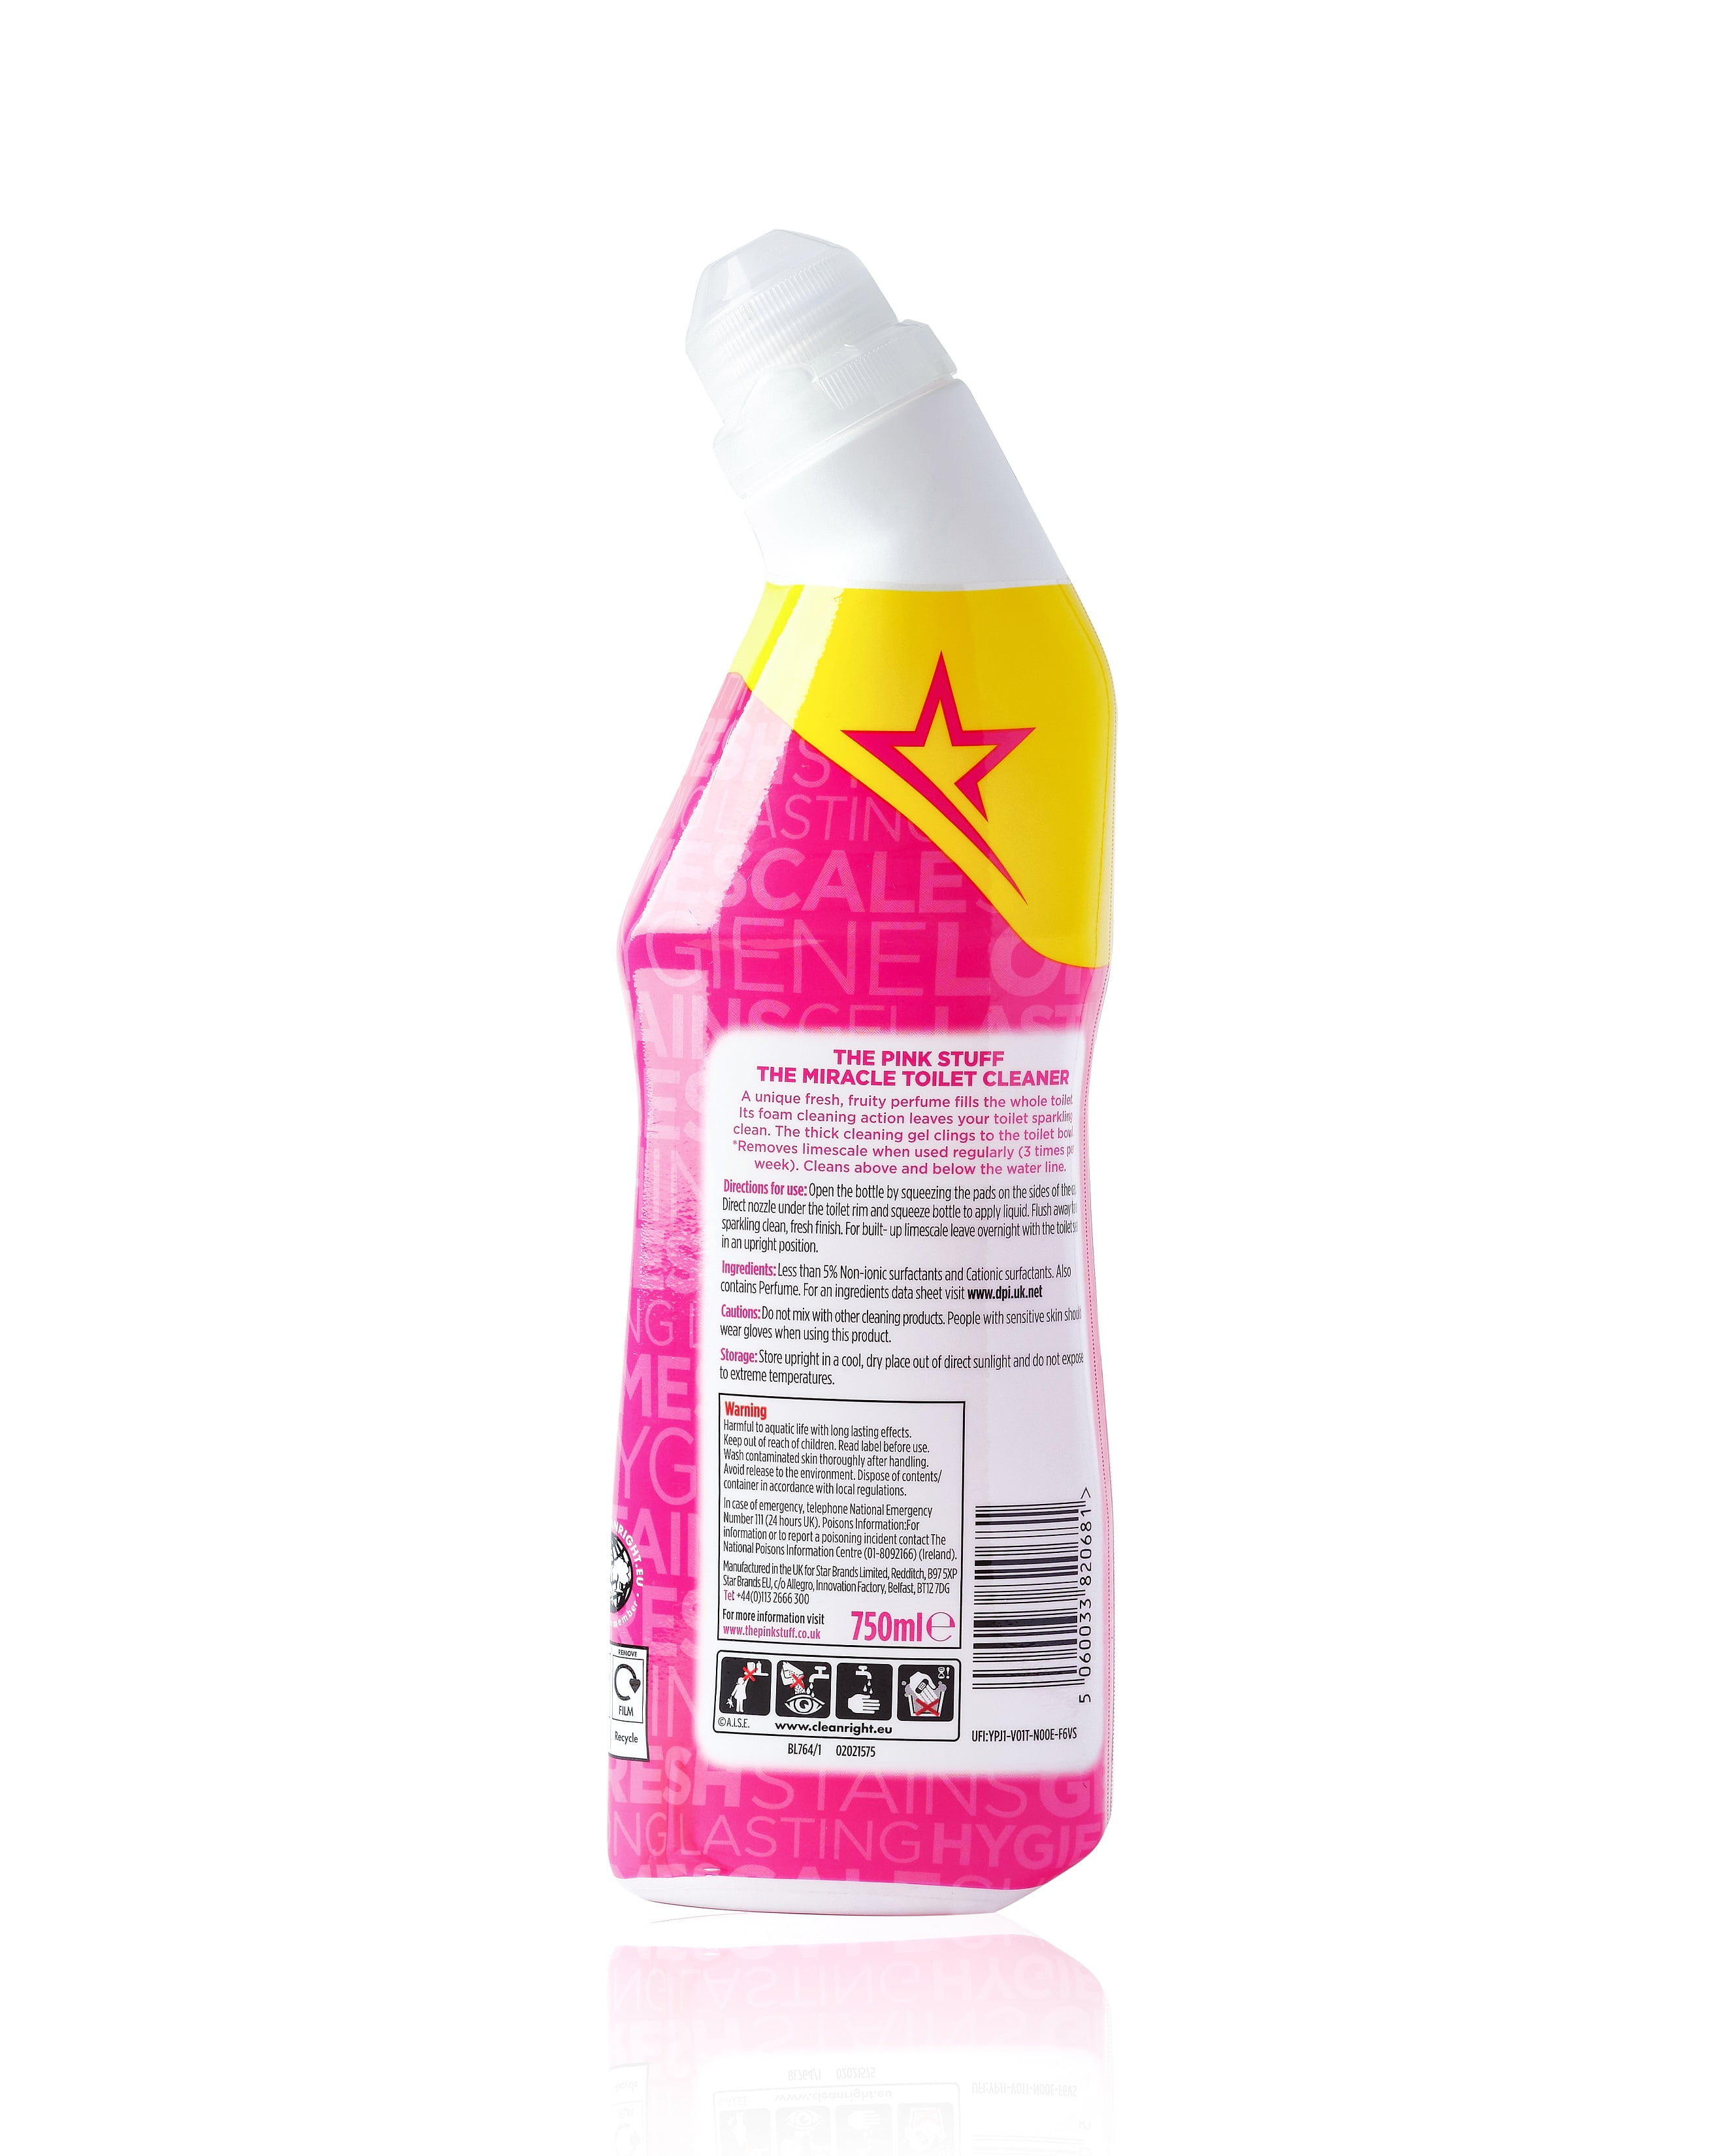 The Pink Stuff The Miracle Toilet Cleaner - 750 ml